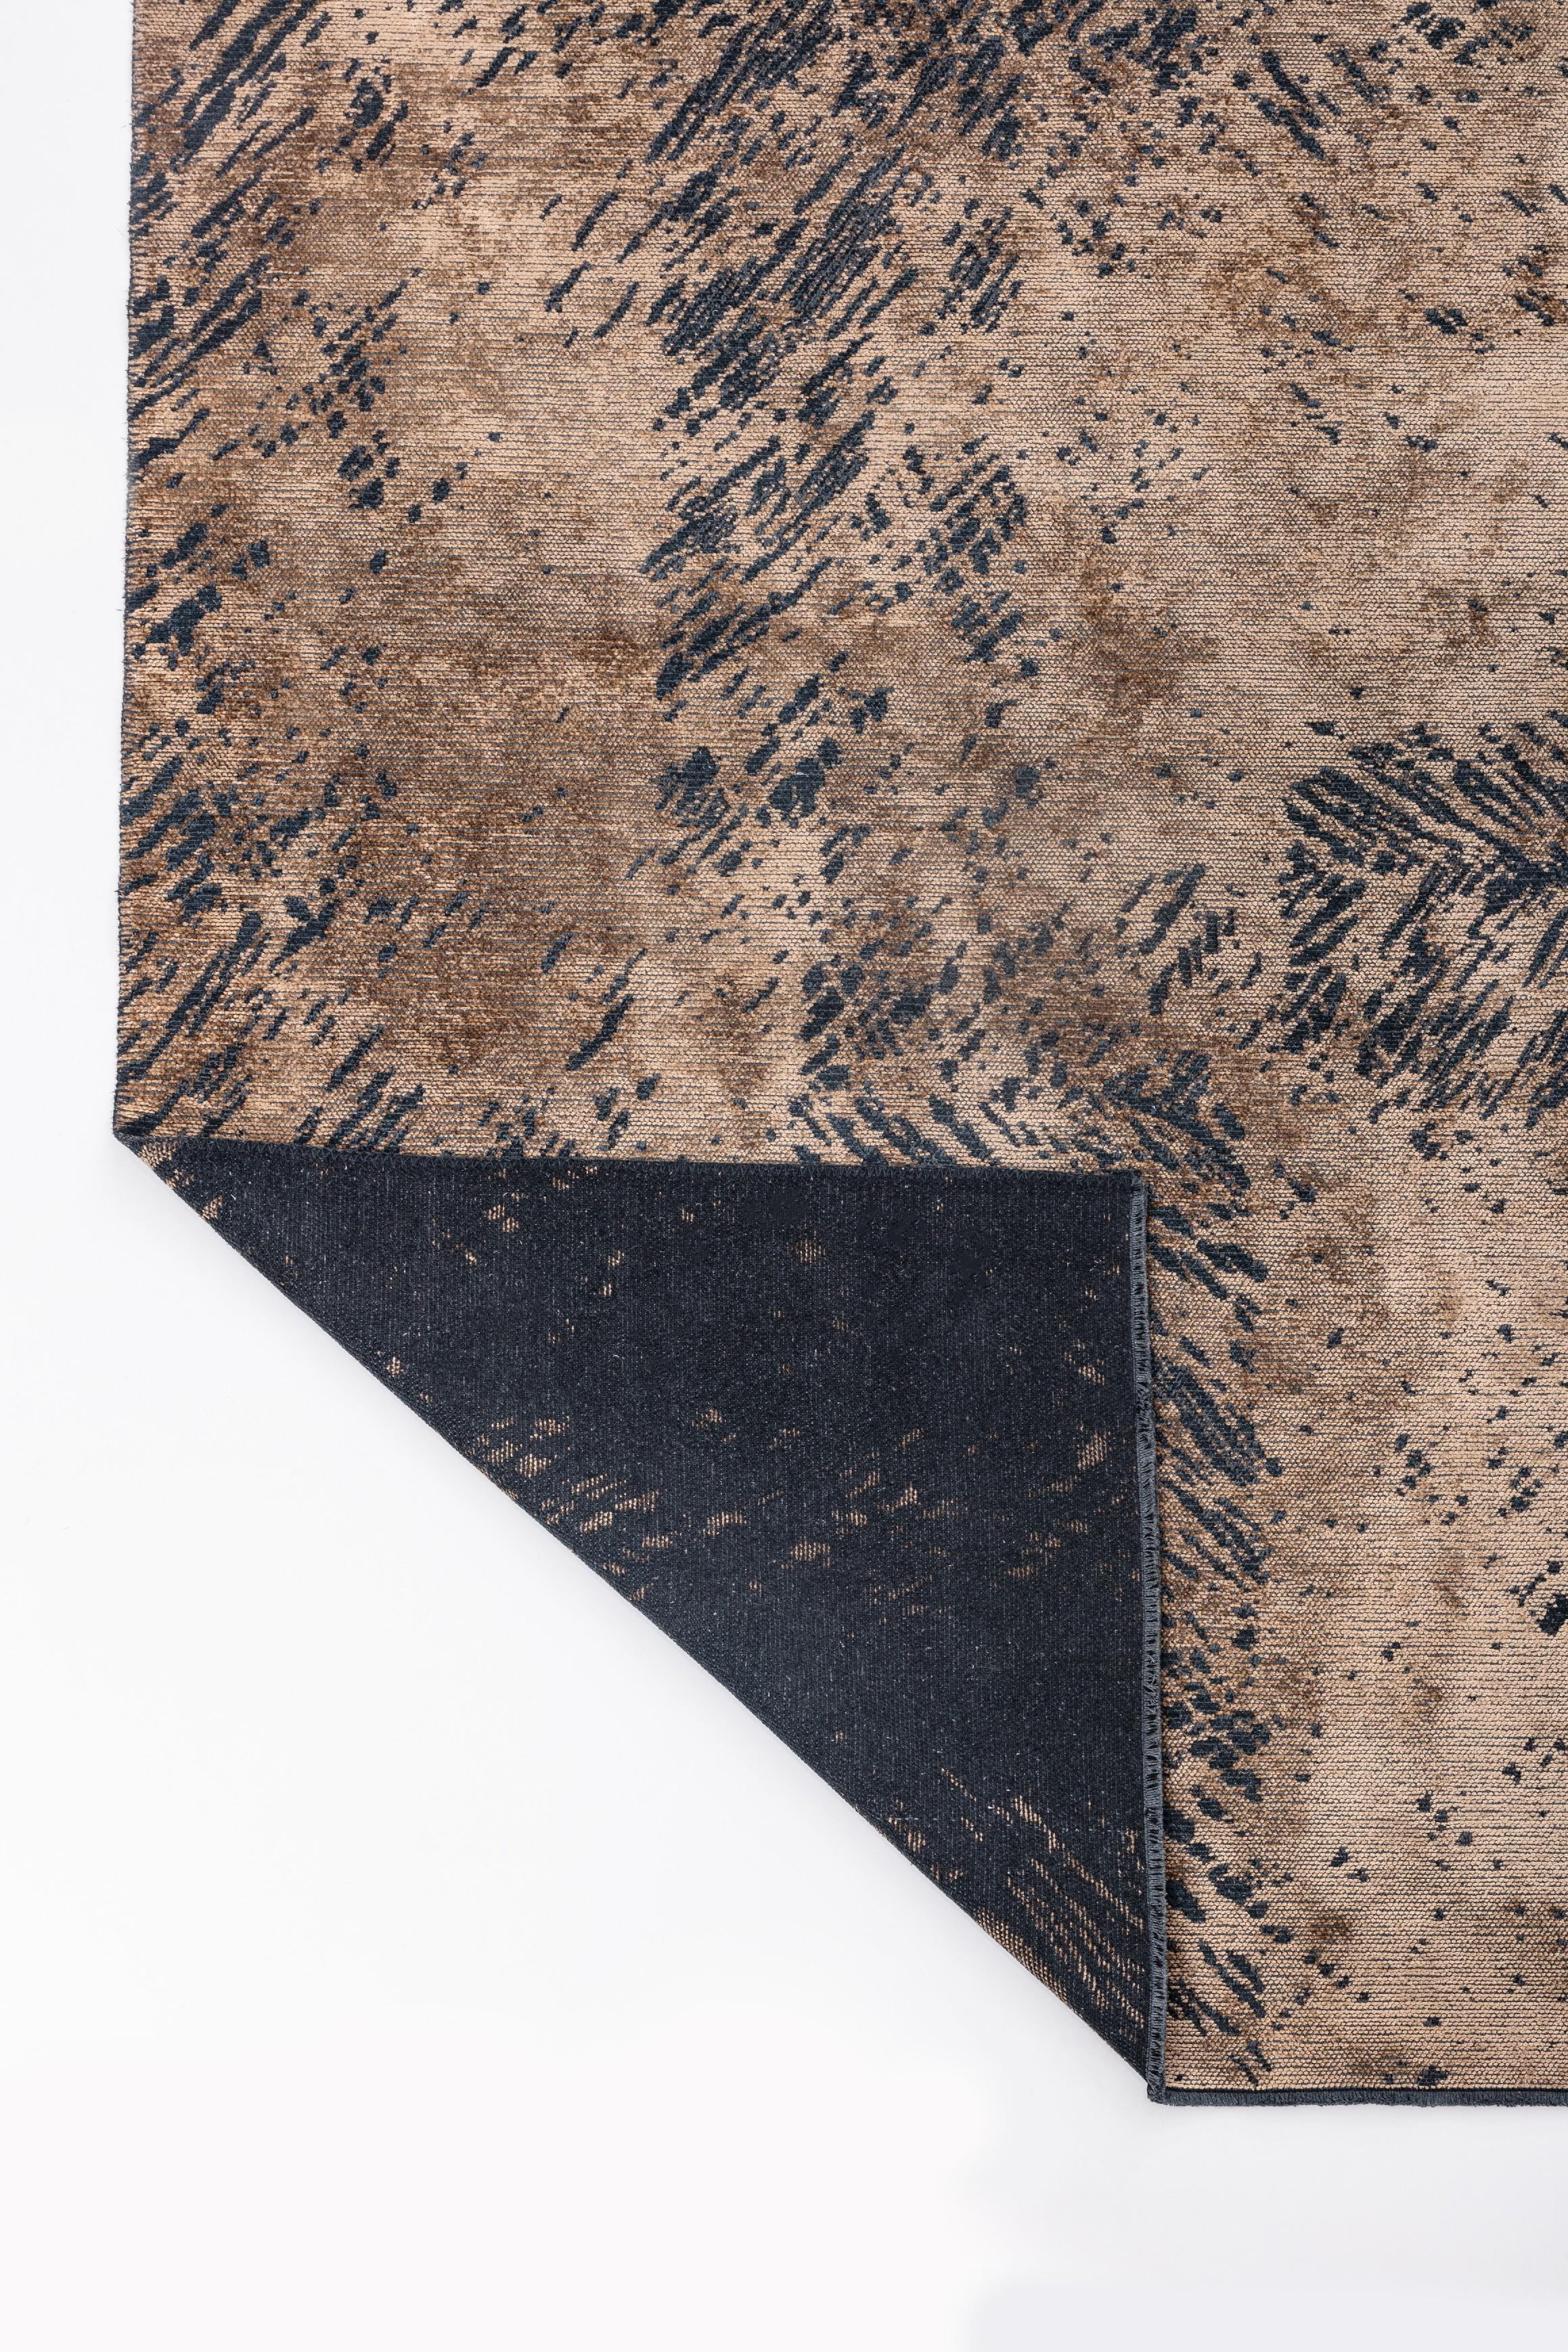 For Sale:  (Brown) Modern Abstract Luxury Area Rug 3